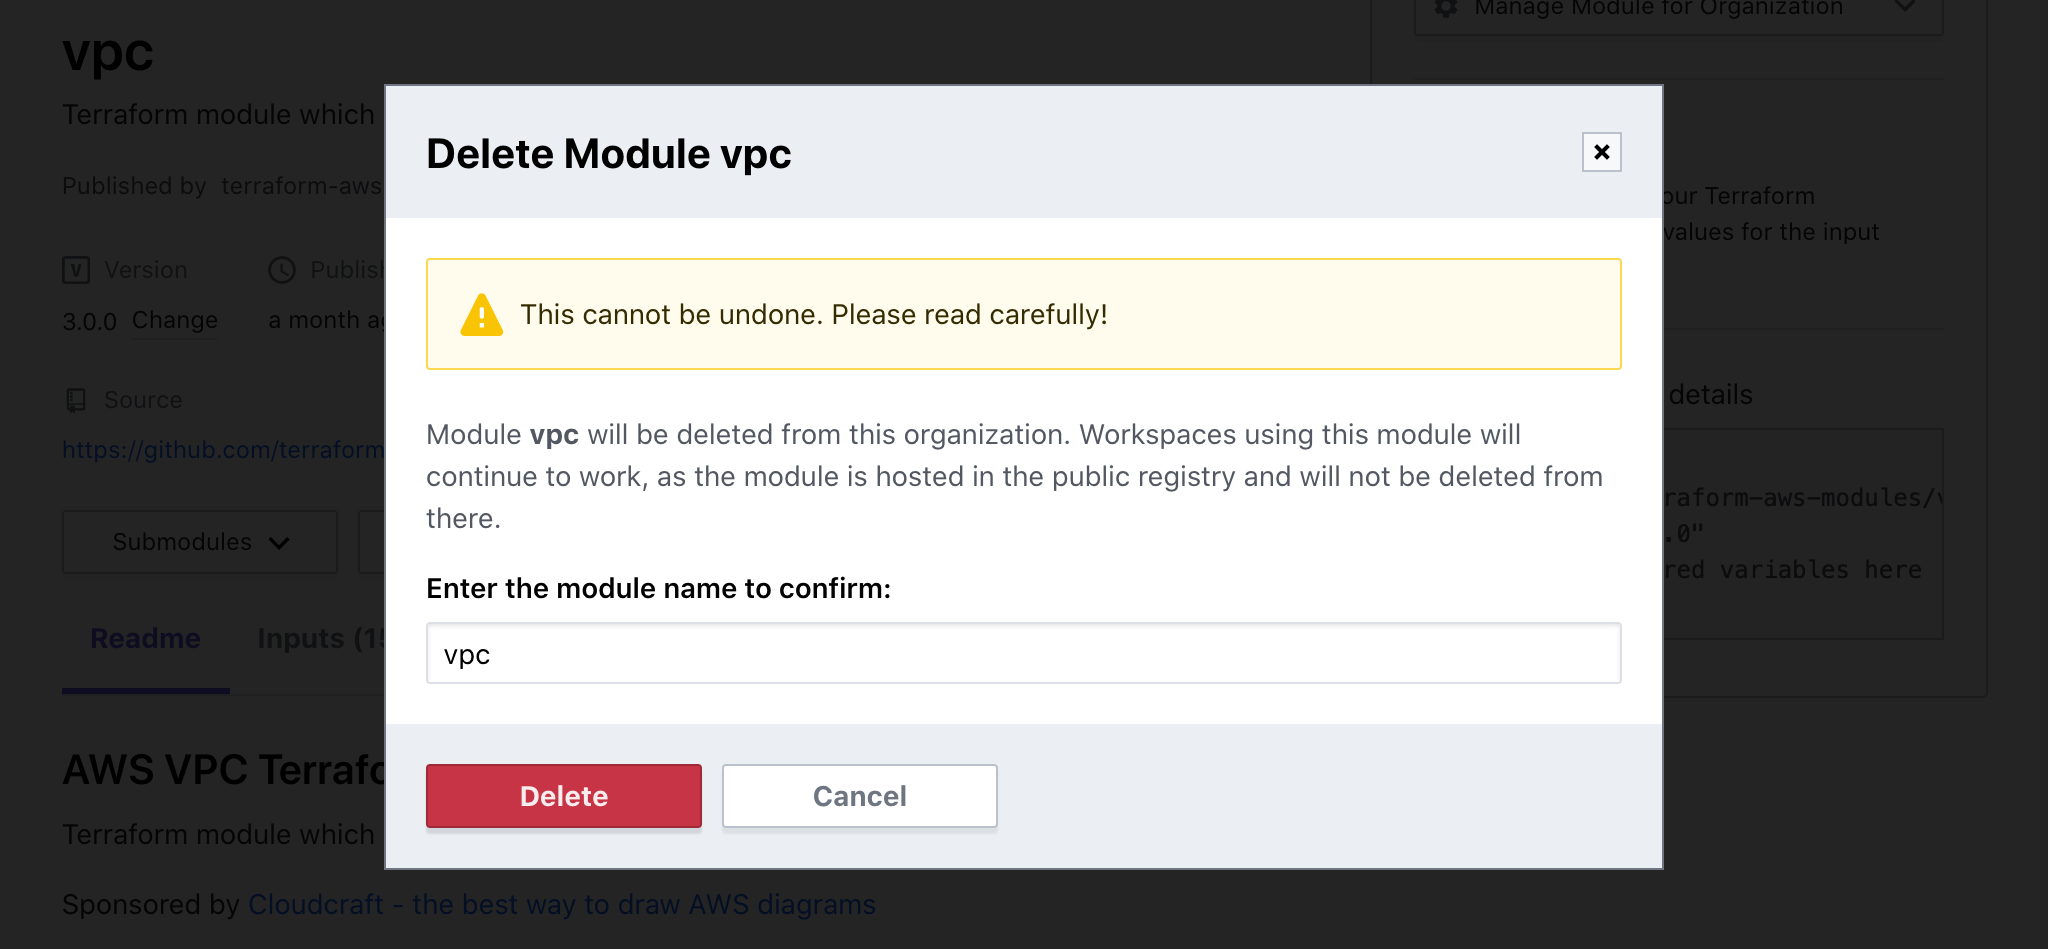 Confirm VPC module removal from your organization's private registry